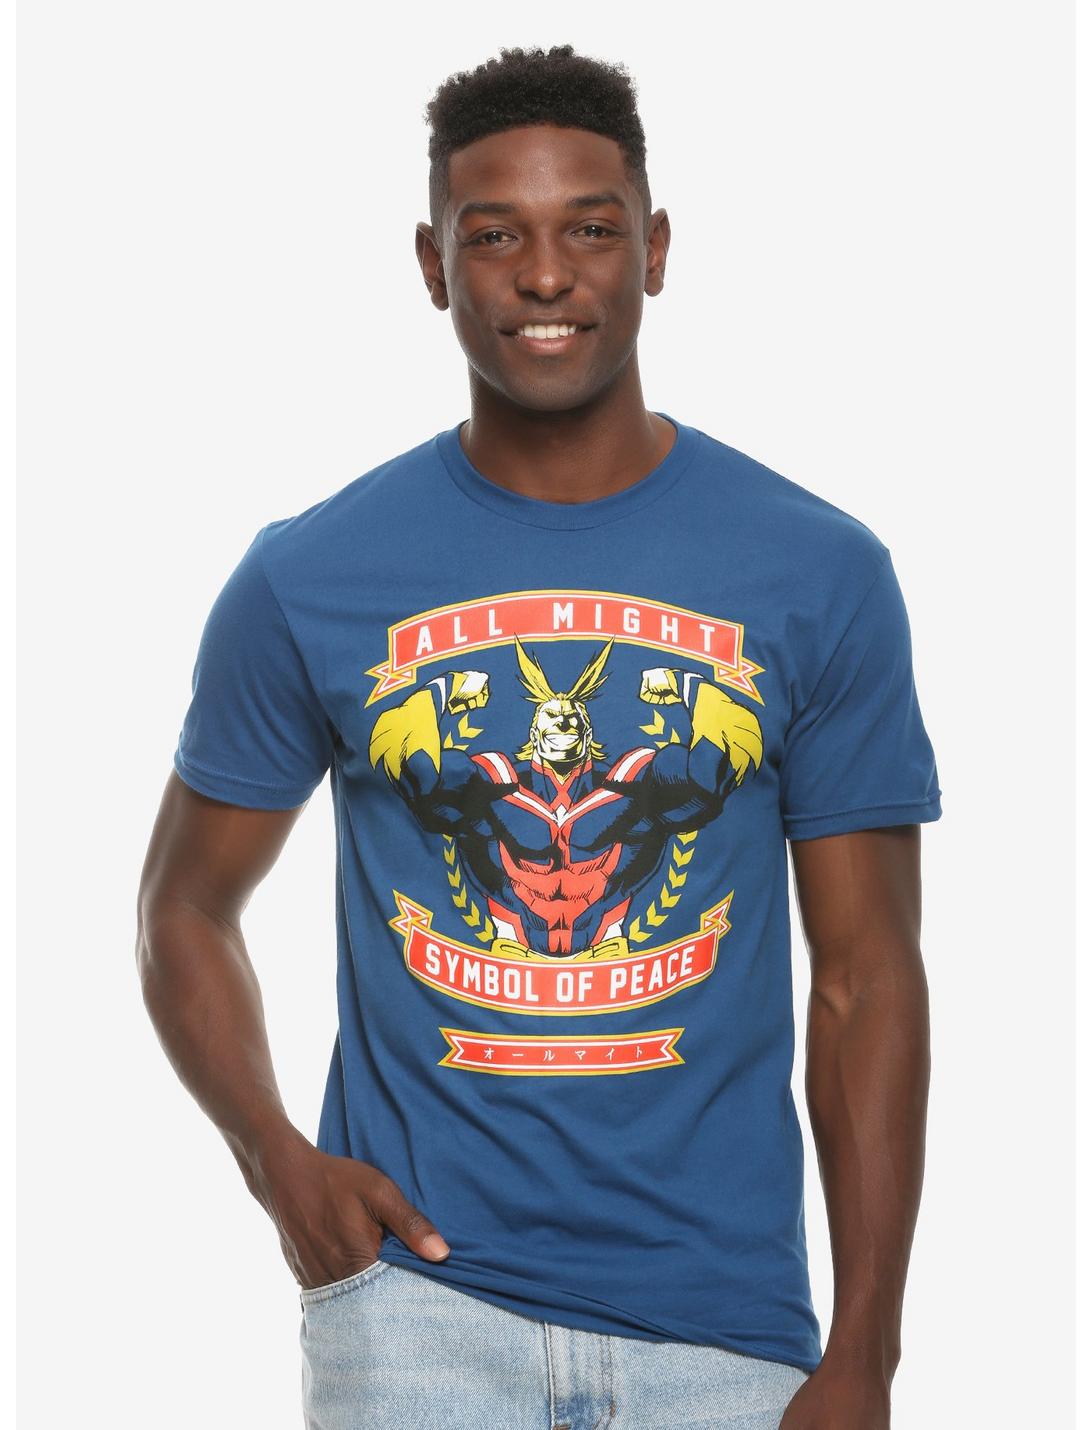 My Hero Academia All Might Symbol of Peace T-Shirt - BoxLunch Exclusive, BLUE, hi-res